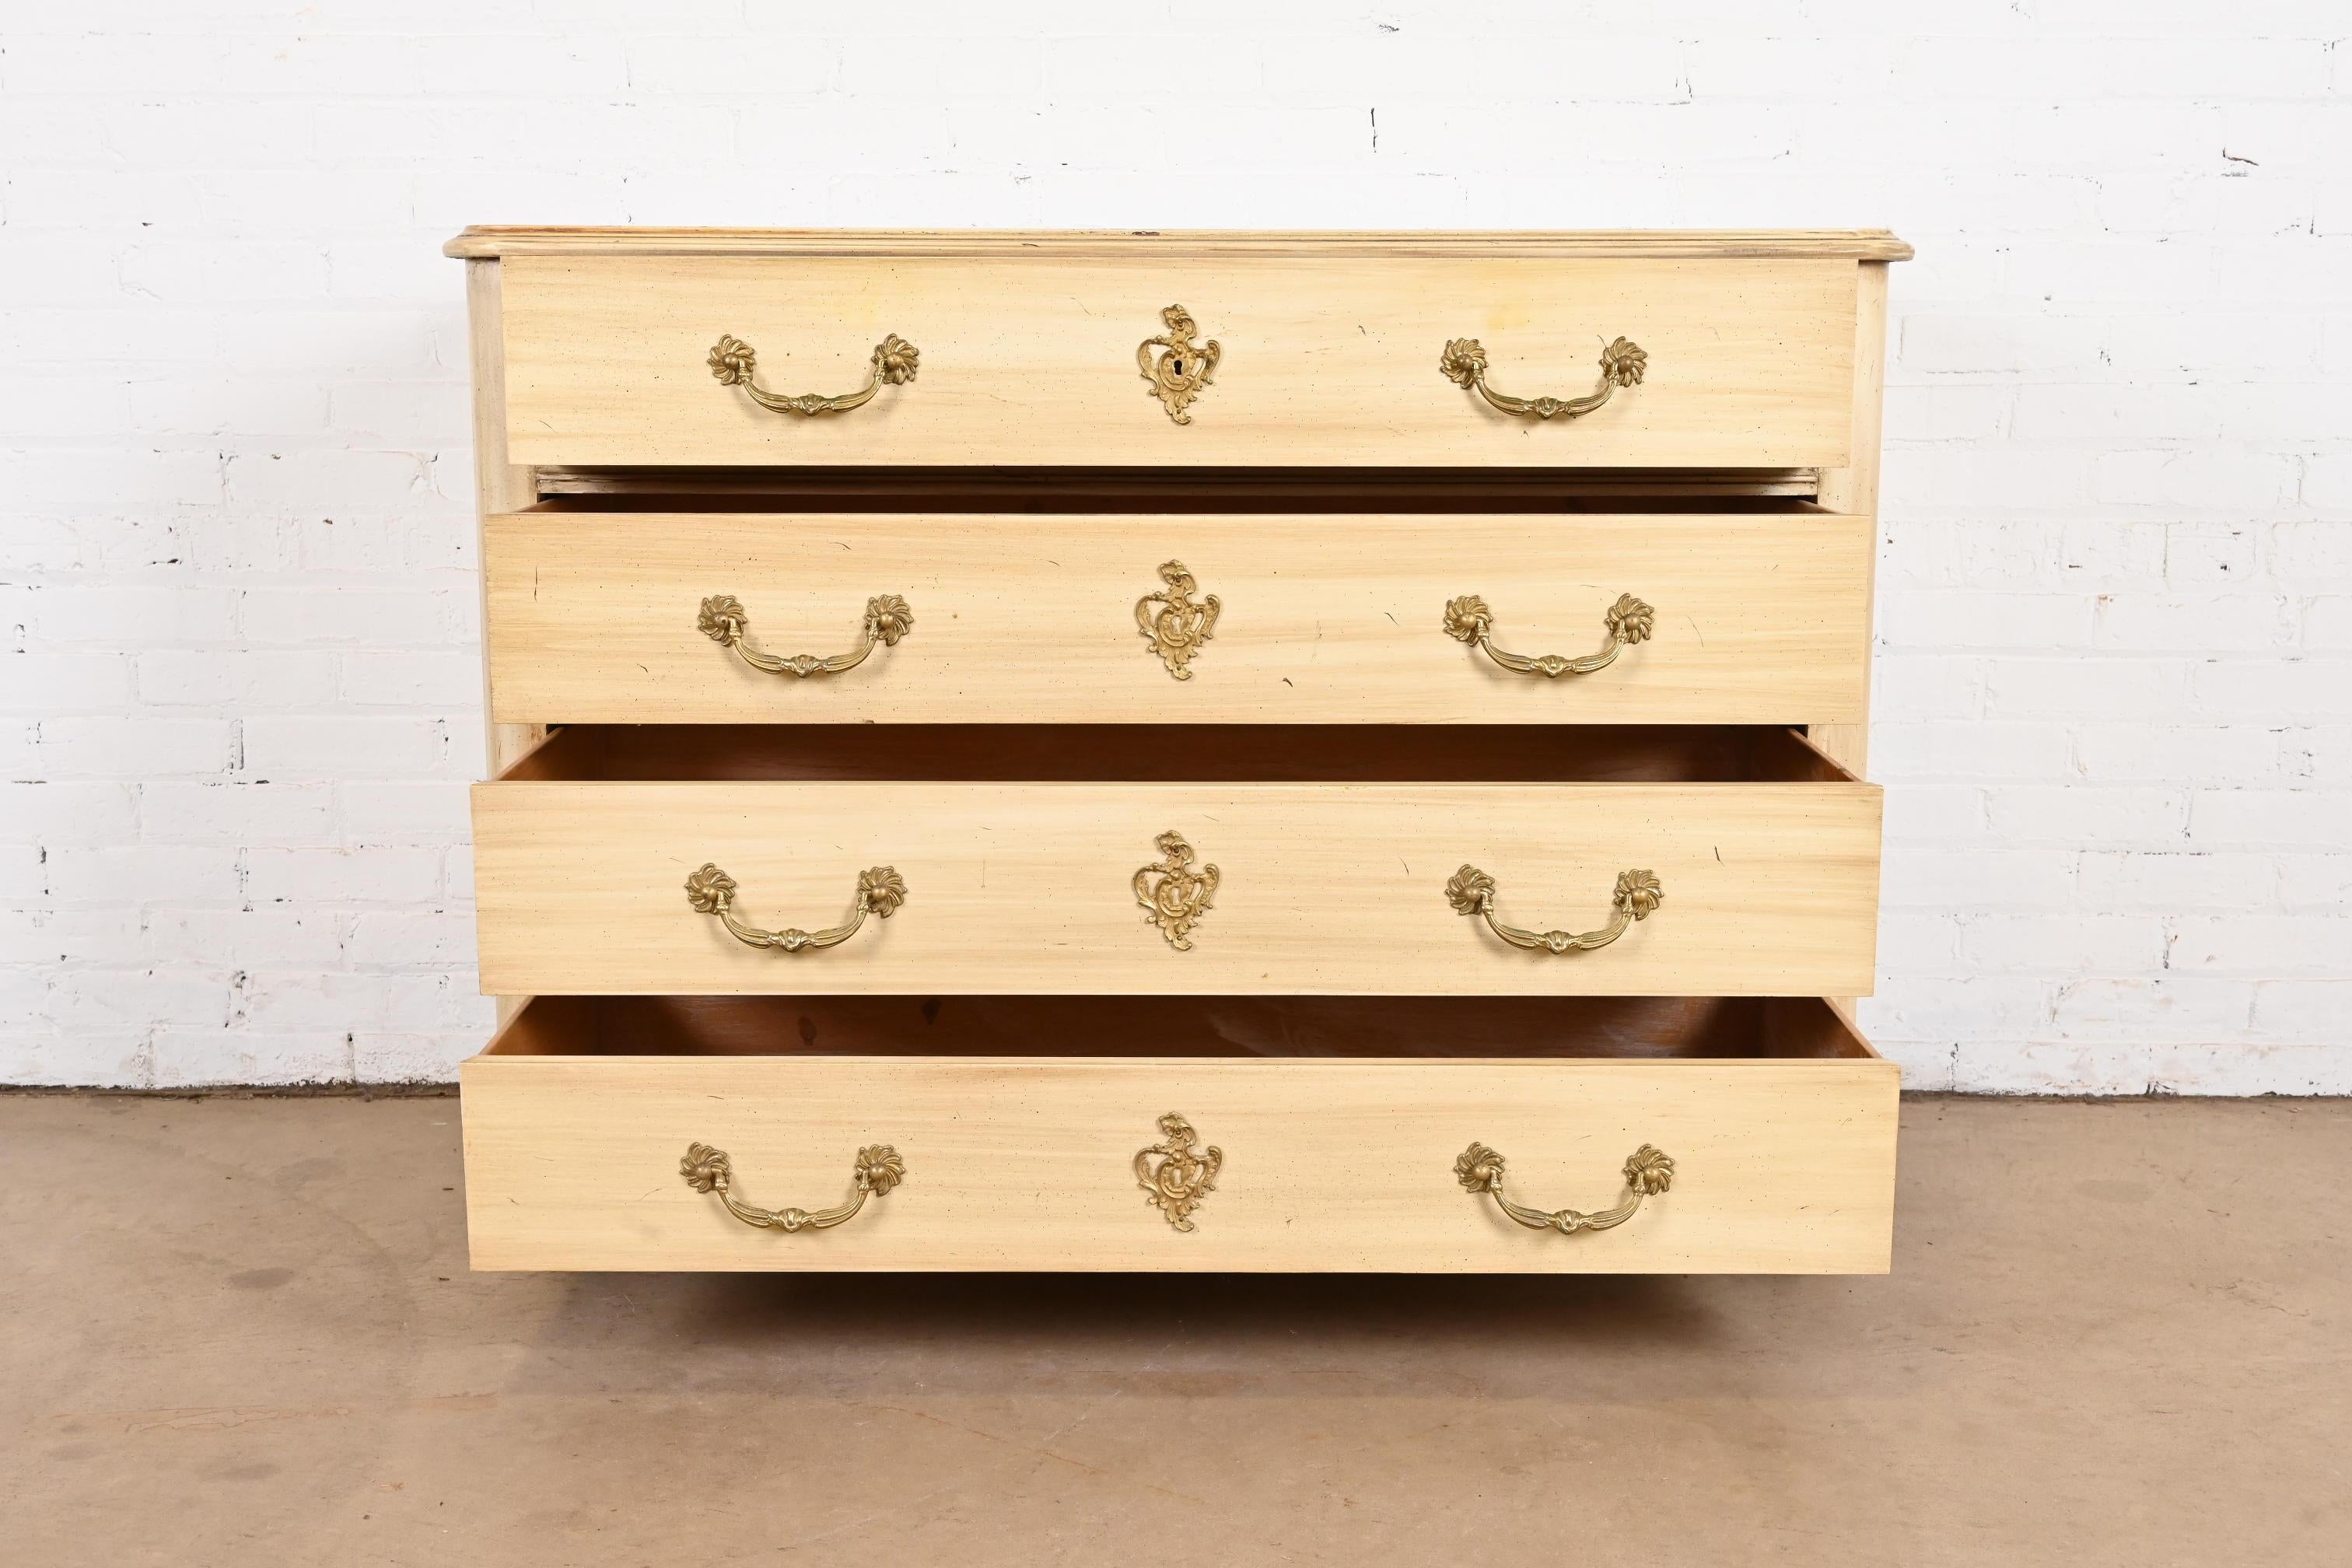 Mid-20th Century Baker Furniture French Provincial Cream Painted Chest of Drawers, Circa 1960s For Sale